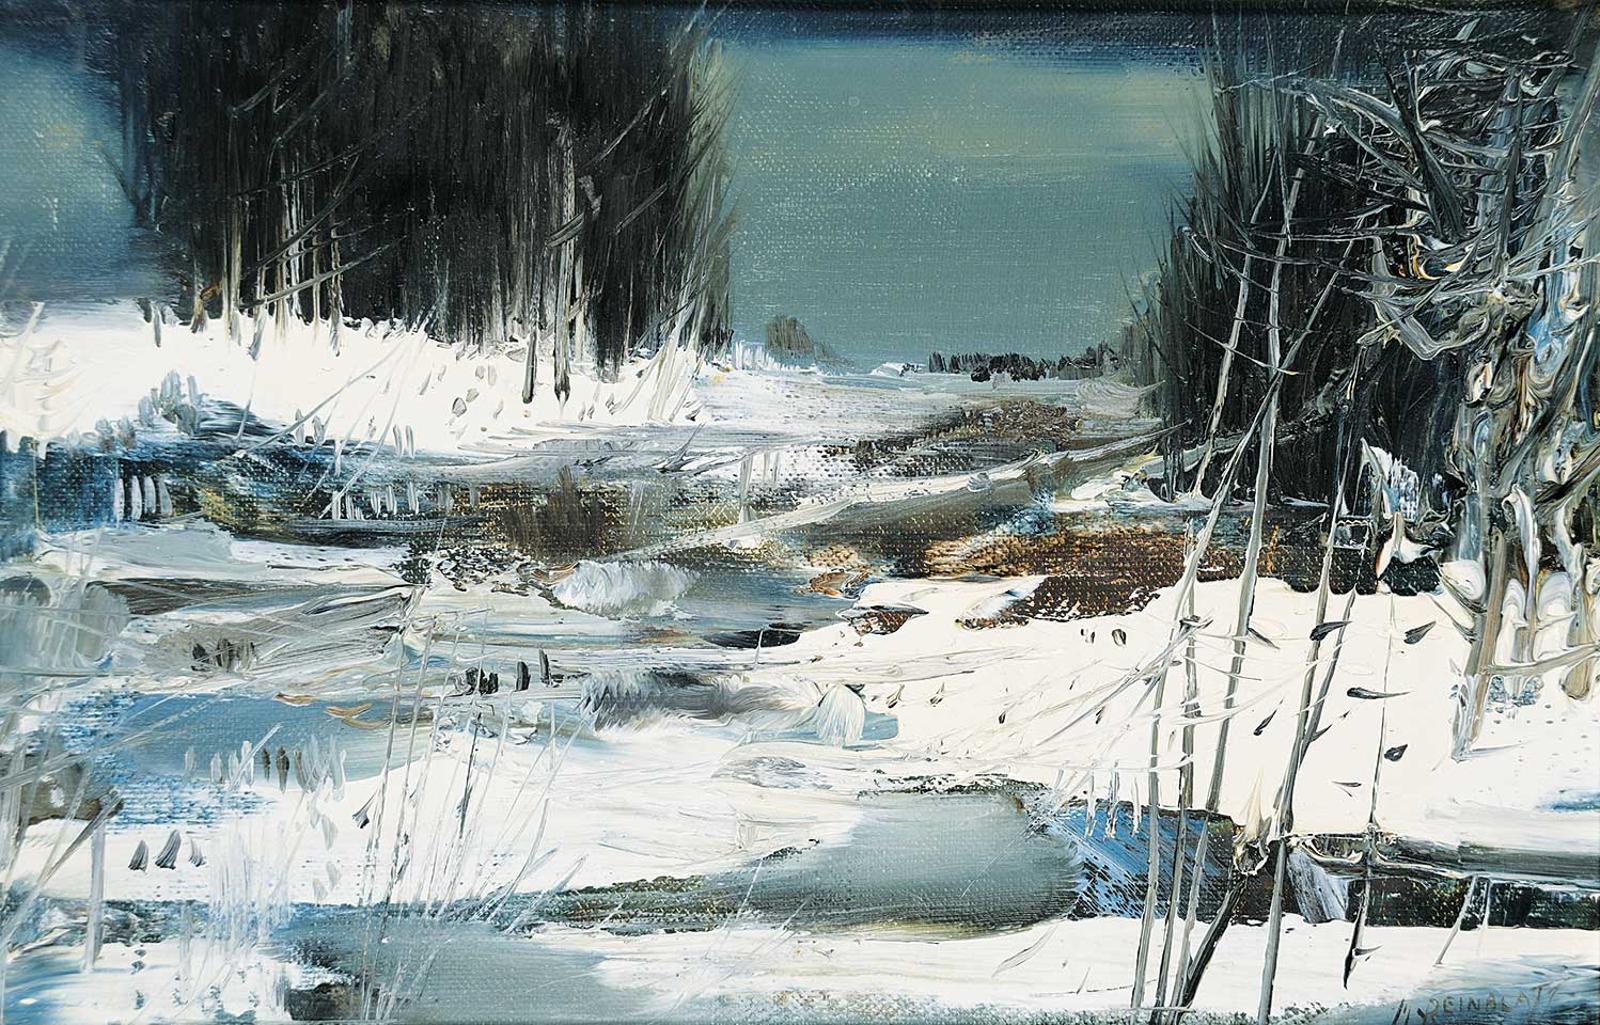 Moses (Moe) Martin Reinblatt (1917-1979) - Untitled - A Snowy Day on the River